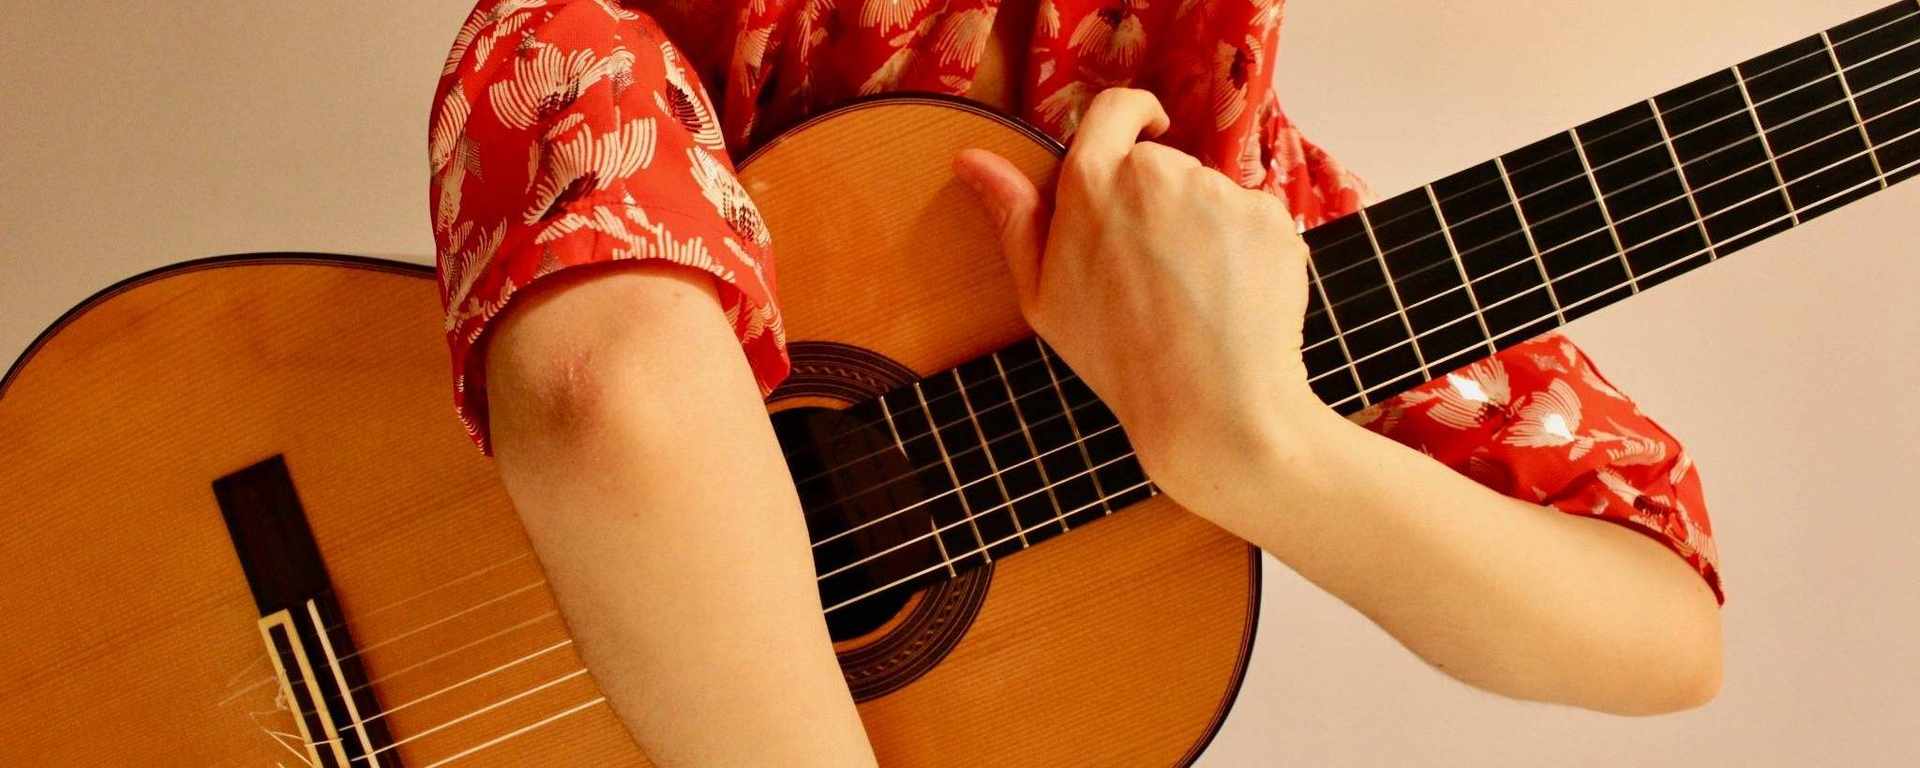 Classical/acoustic guitar and music theory lesson online